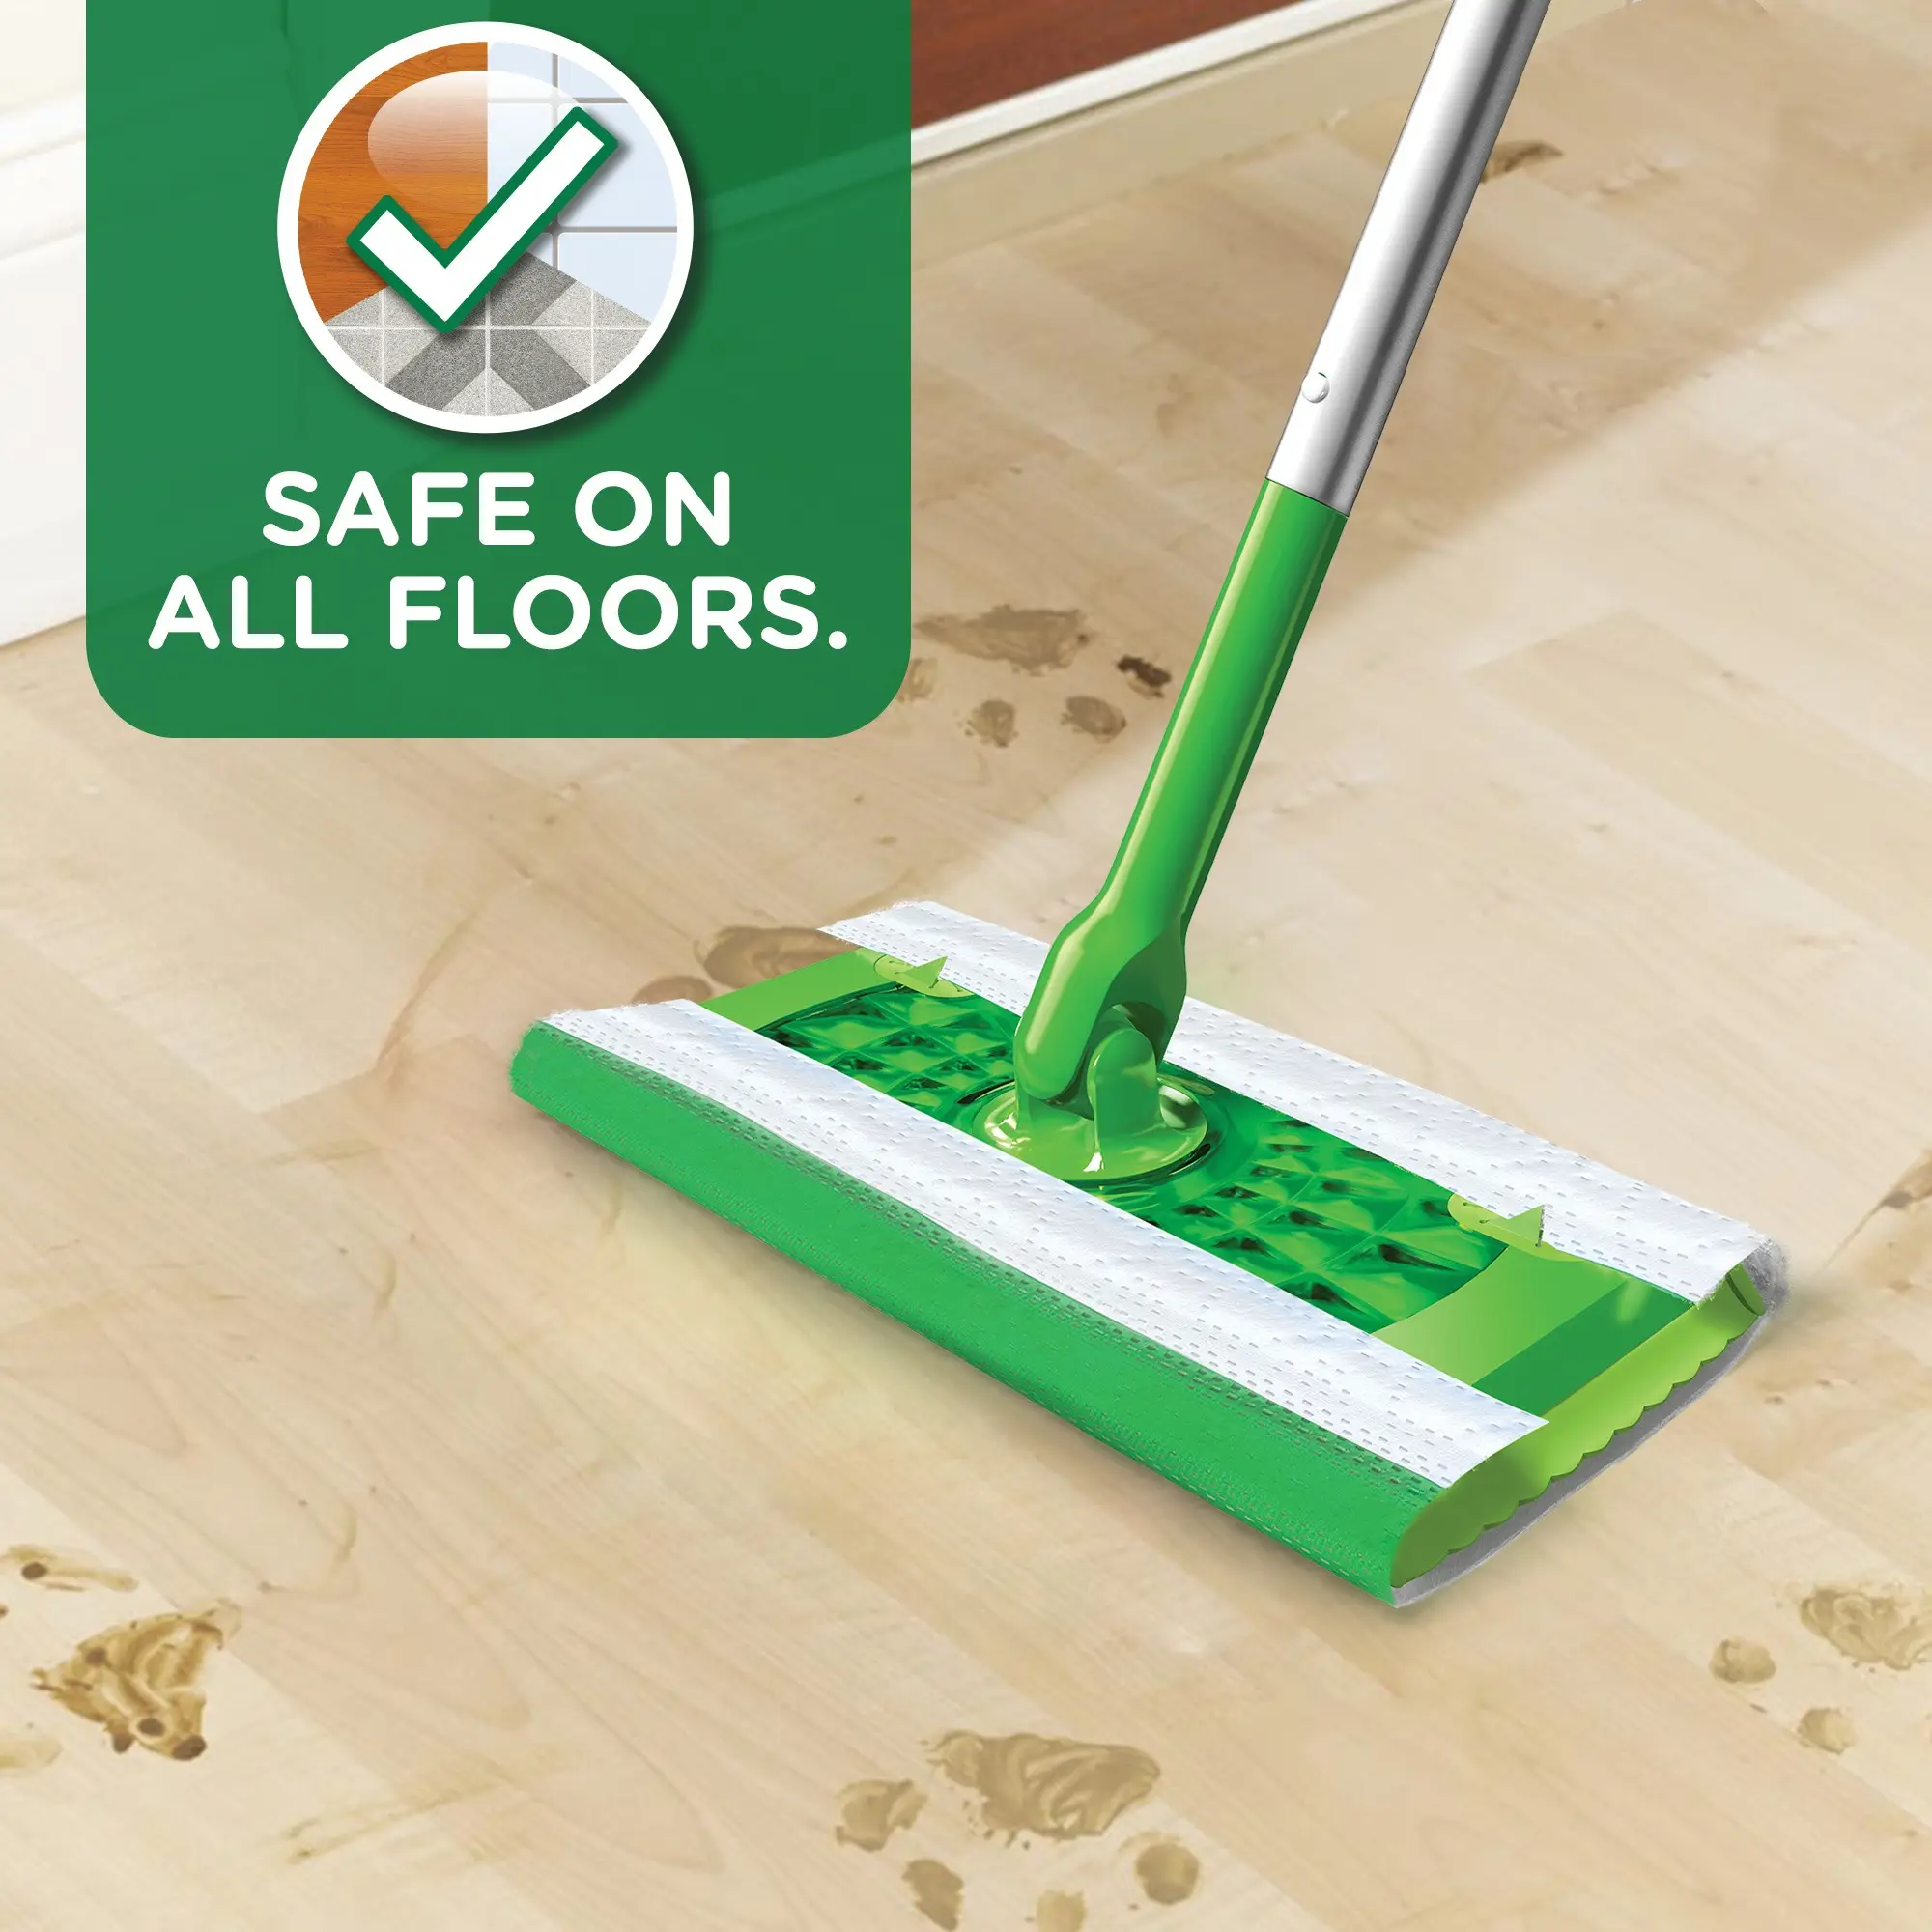 Swiffer® Sweeper 75588 Disposable Wet Mopping Pads with Open